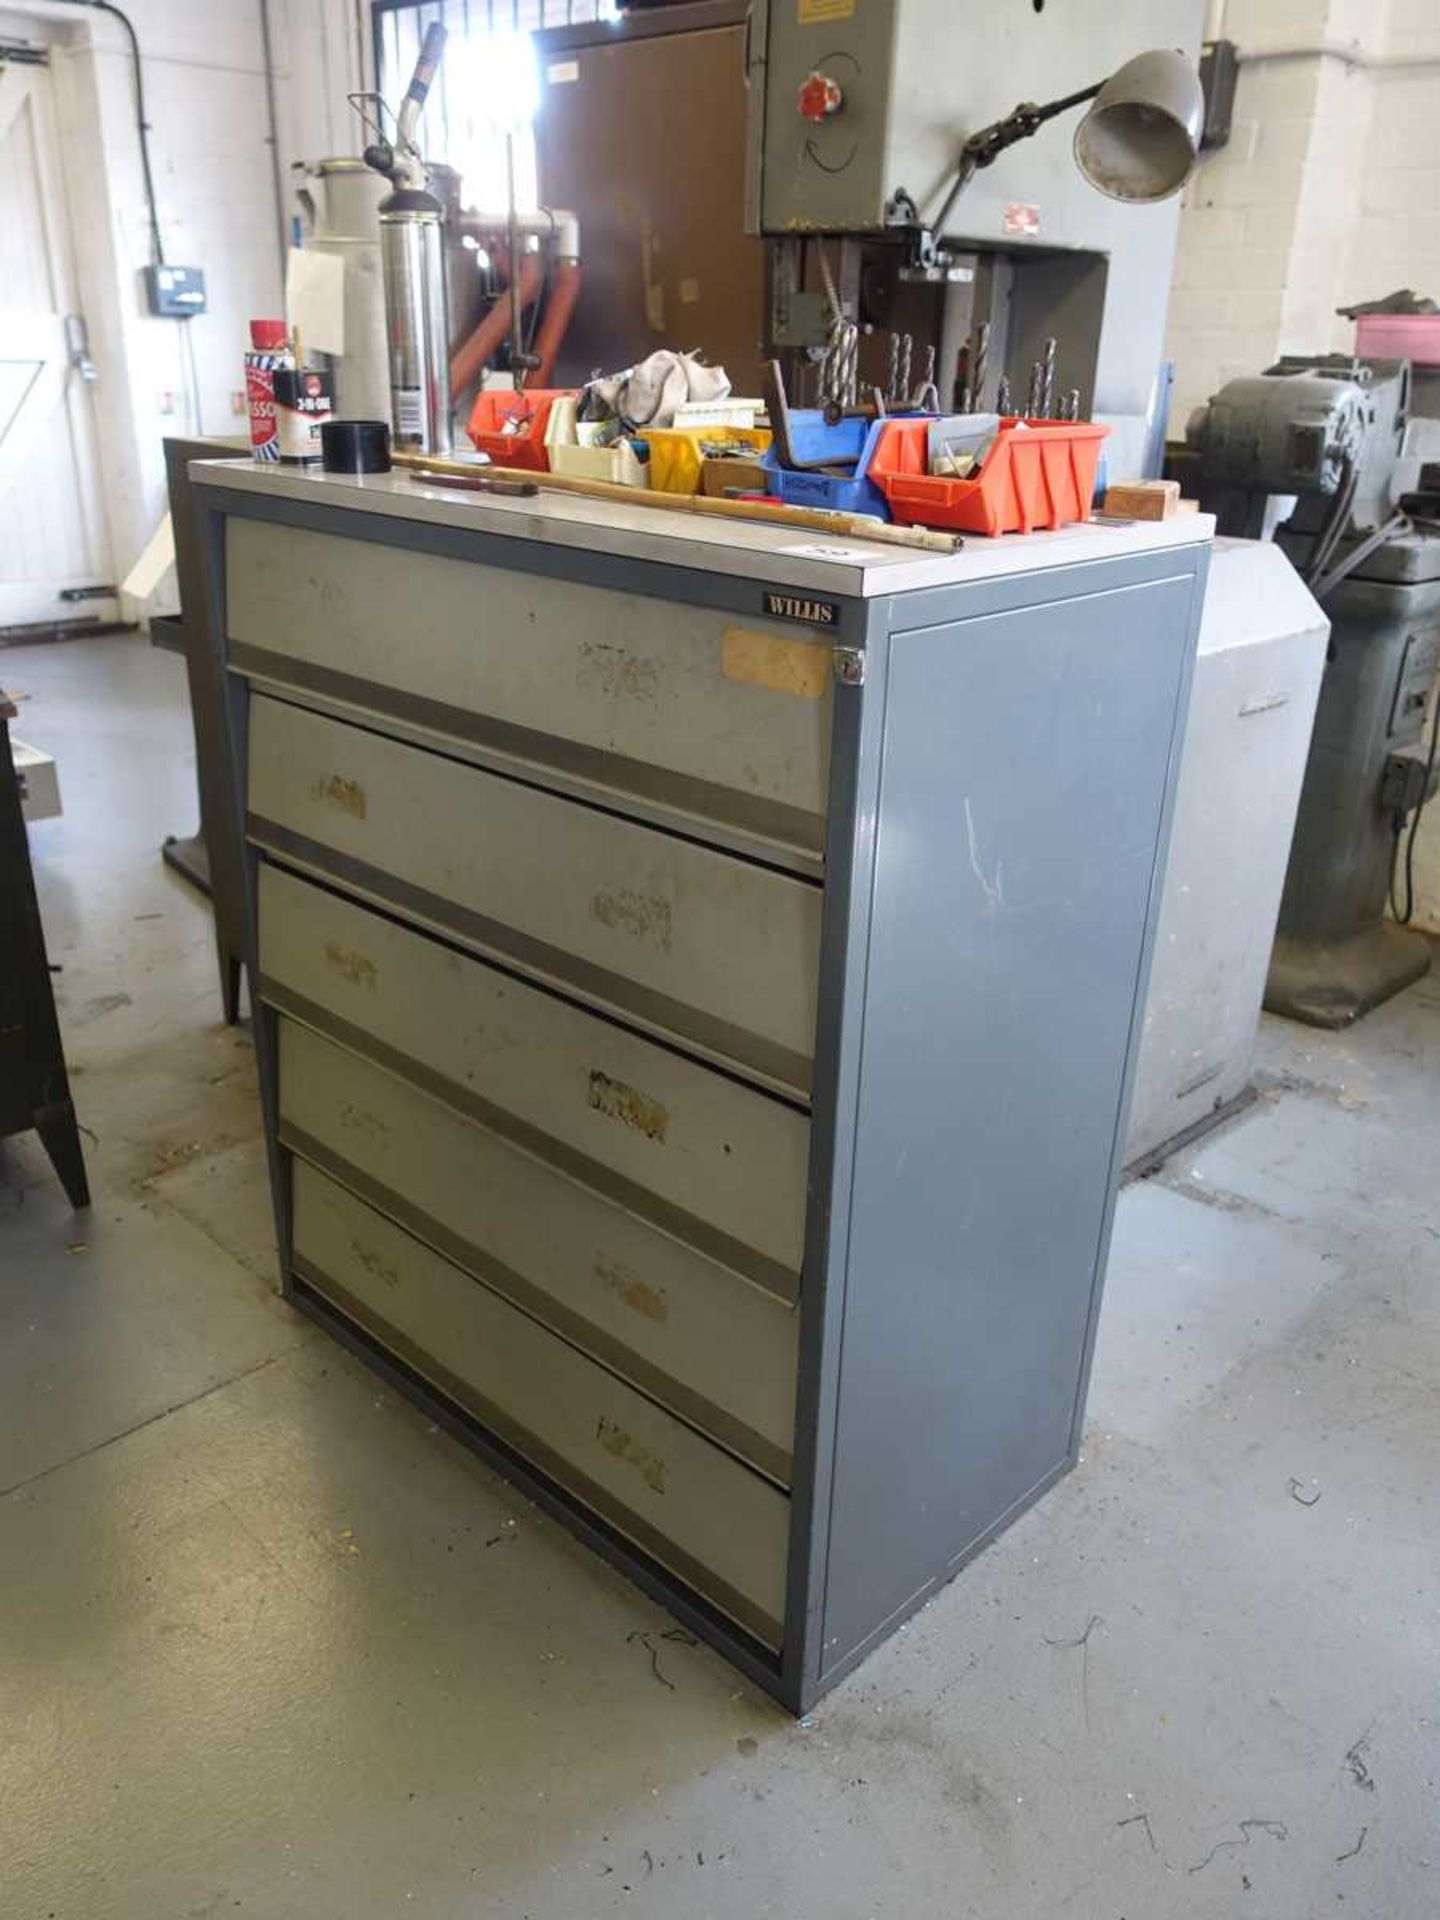 +VAT Willis roller drawer cabinet with contents including tools, inspection equipment, and sundries